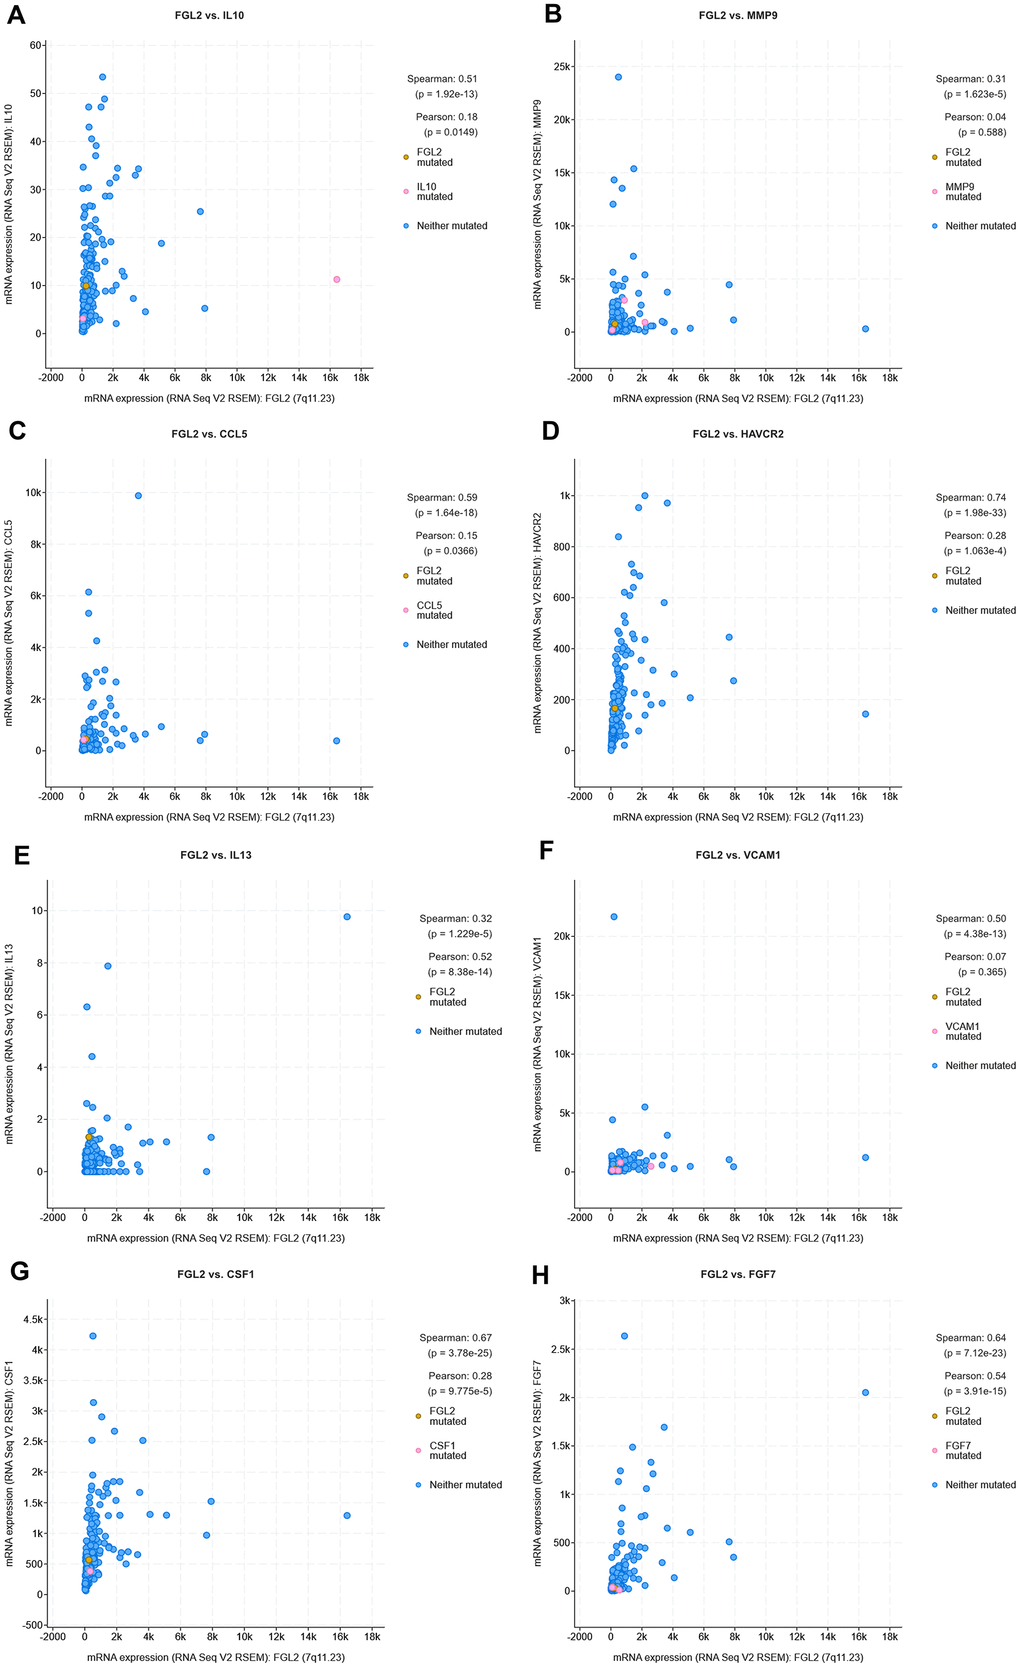 Correlation analysis between cytokine and FGL2 levels in ESCA tissues using cBioPortal. (A–H) Scatterplots depicting the correlations between the levels of FGL2 and IL-10 (A), MMP9 (B), CCL5 (C), TIM-3 (D), IL-13 (E), VCAM1 (F), M-CSF (CSF1) (G) and FGF-7 (H). A Spearman’s P 